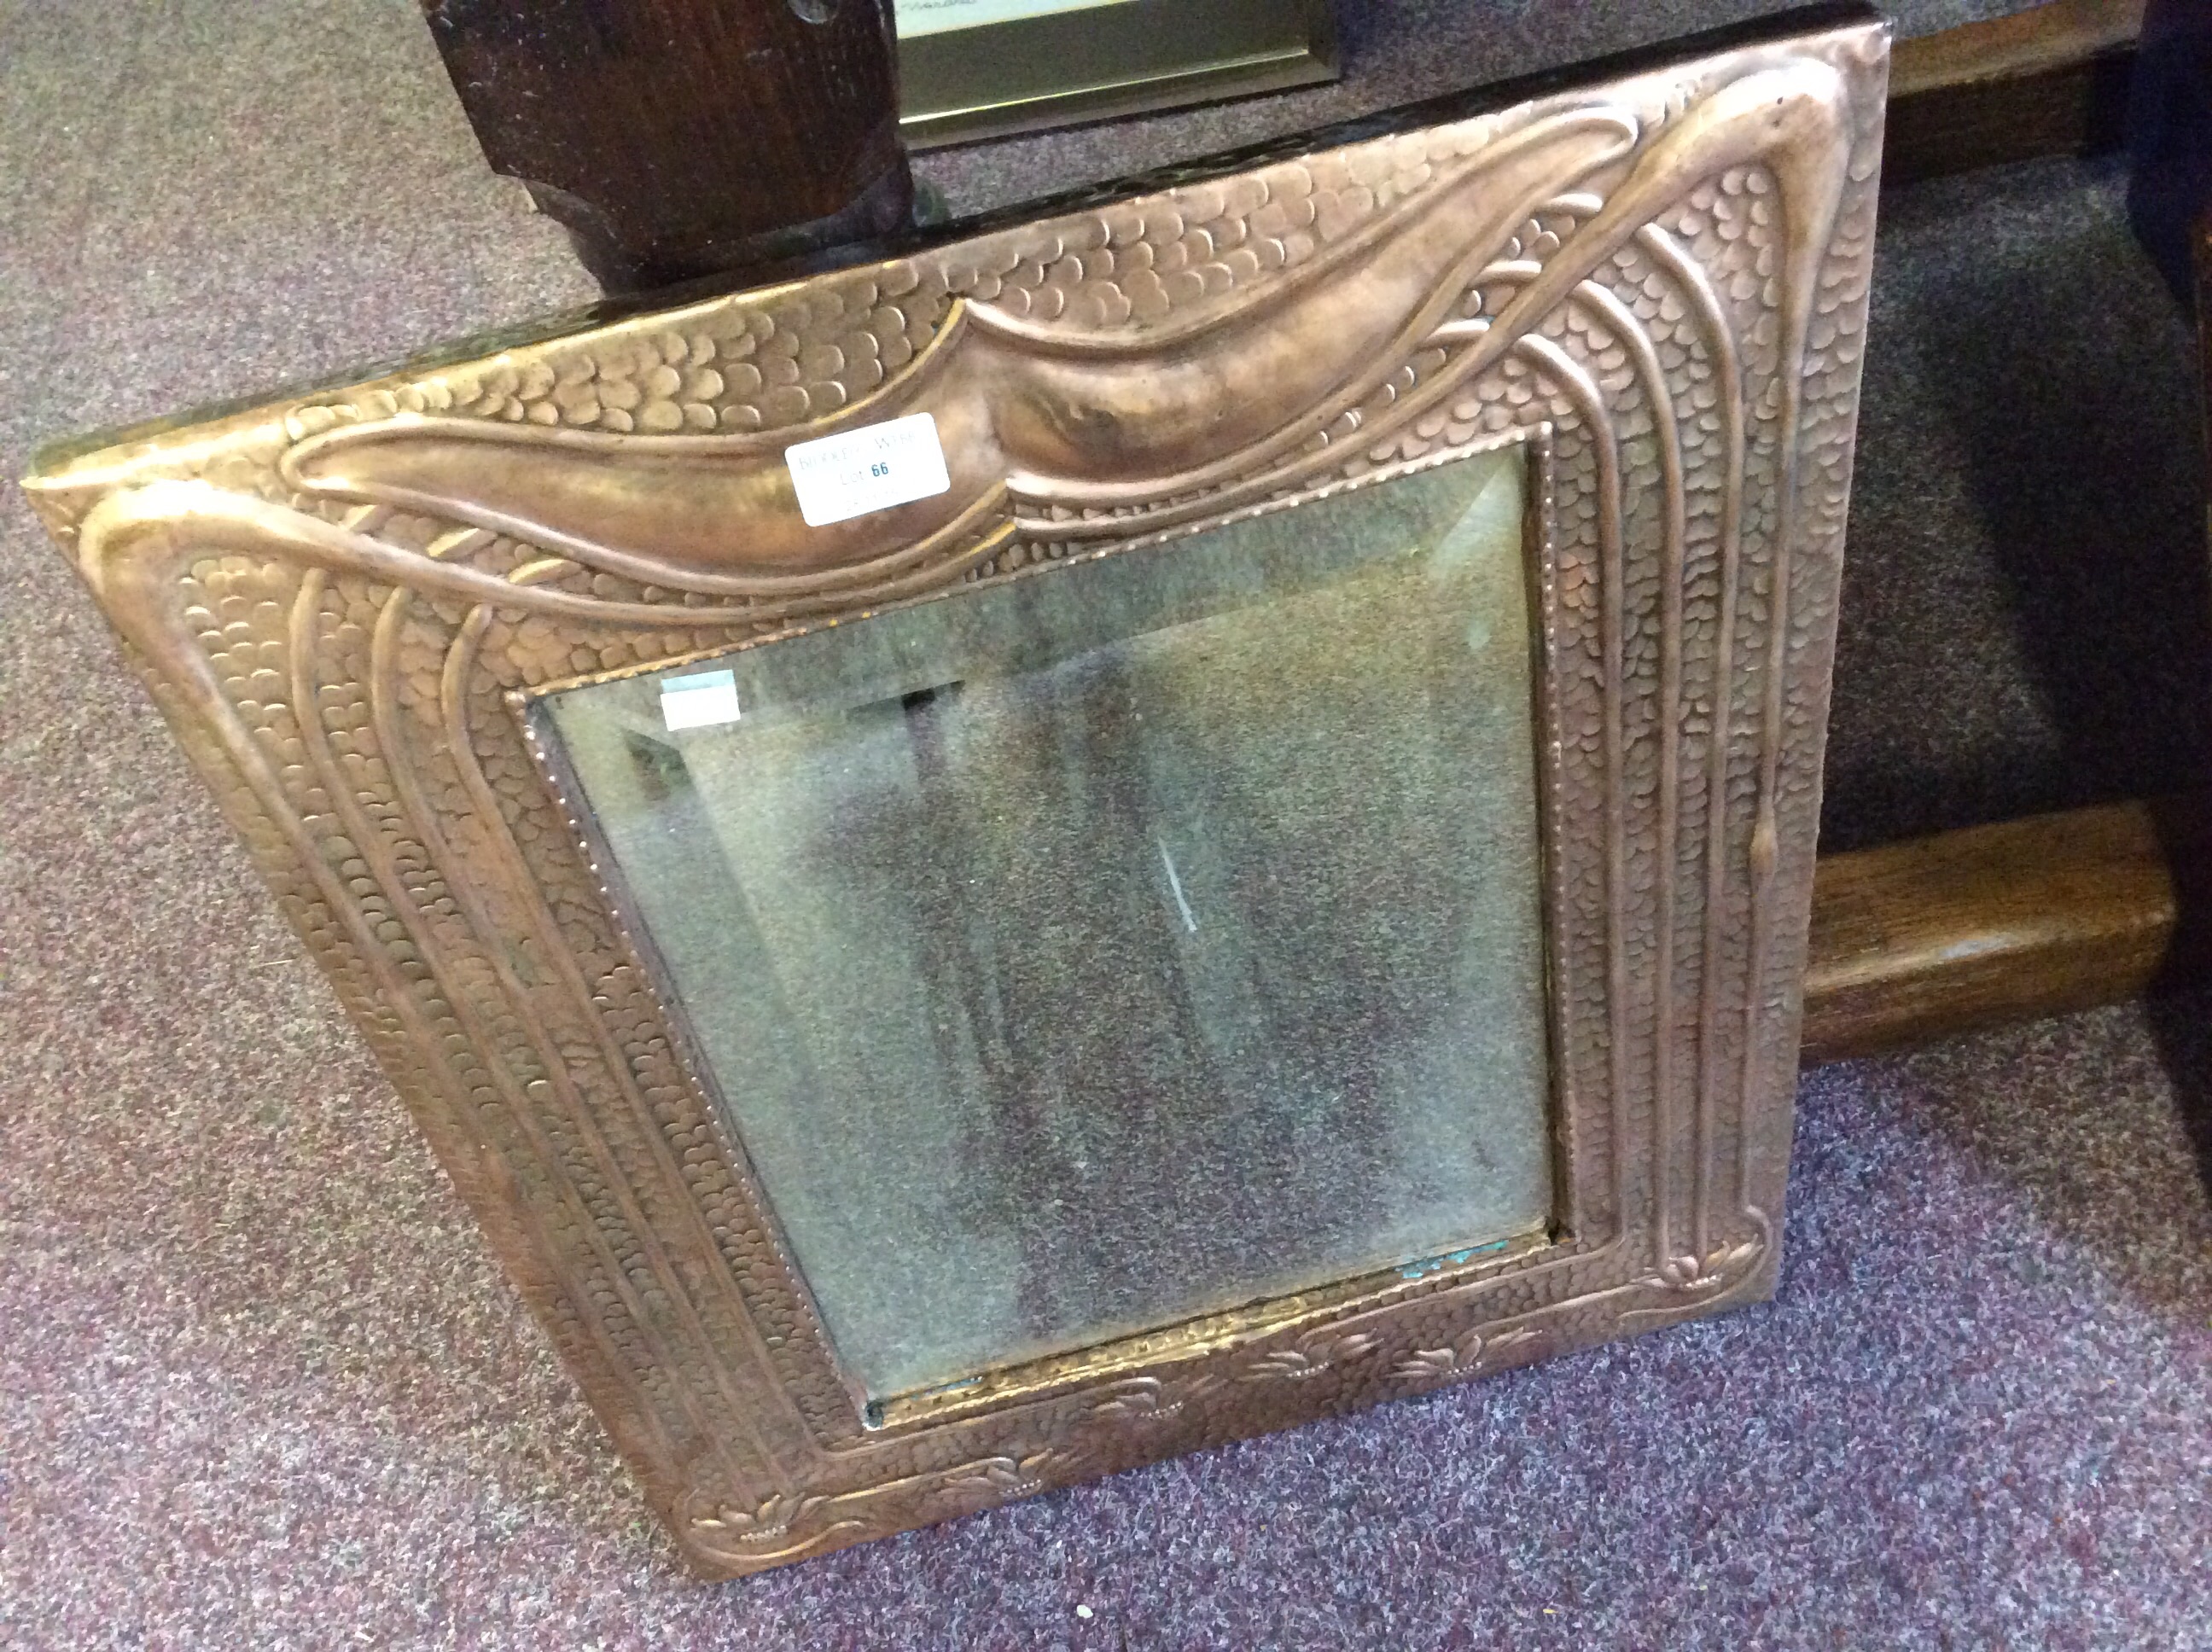 An Arts and Crafts style copper mirror with glial decoration.